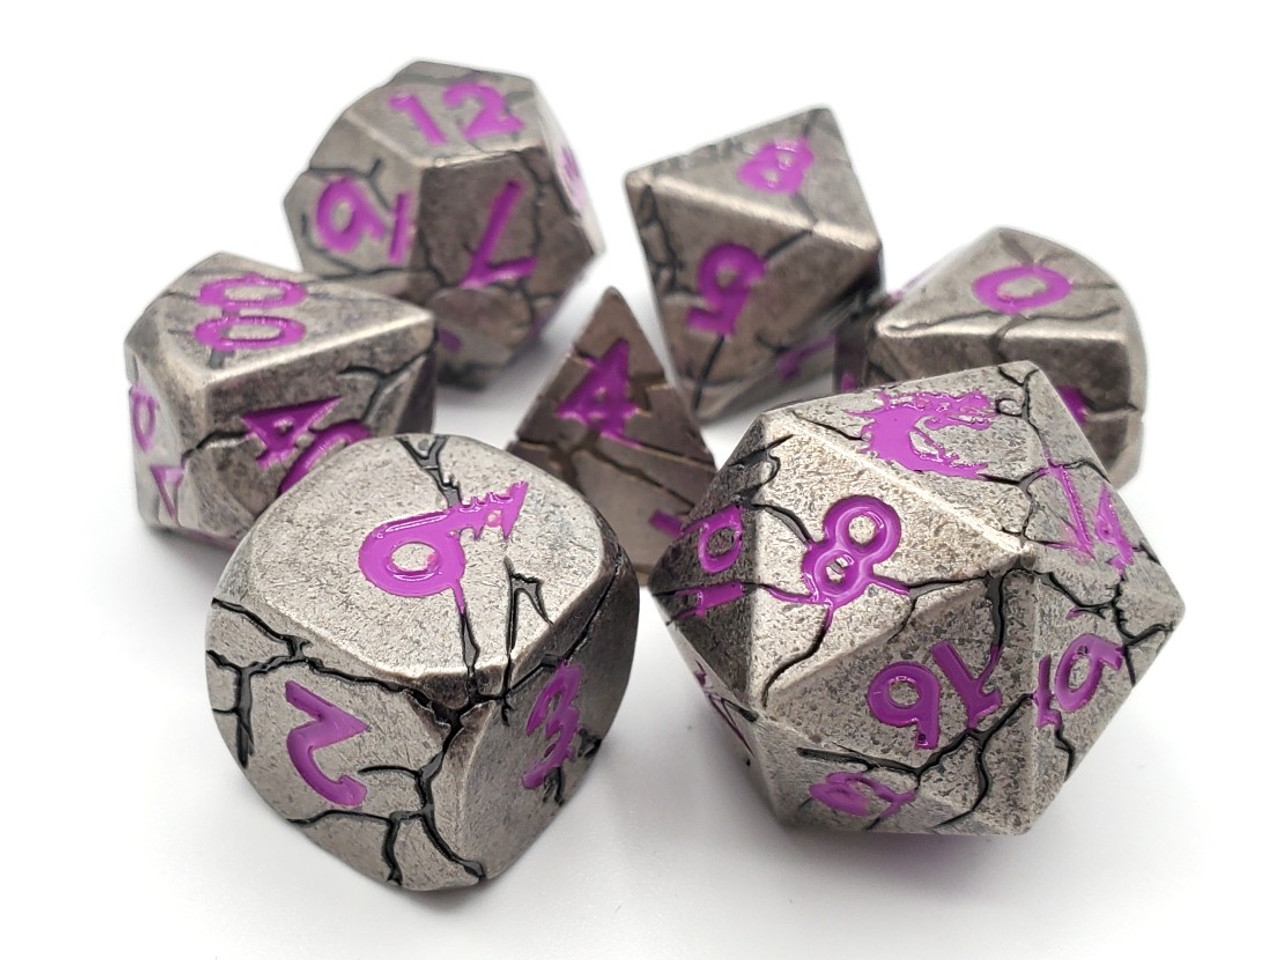 Old School 7 Piece Dnd RPG Metal Dice Set Orc Forged - Ancient Silver W/ Magenta